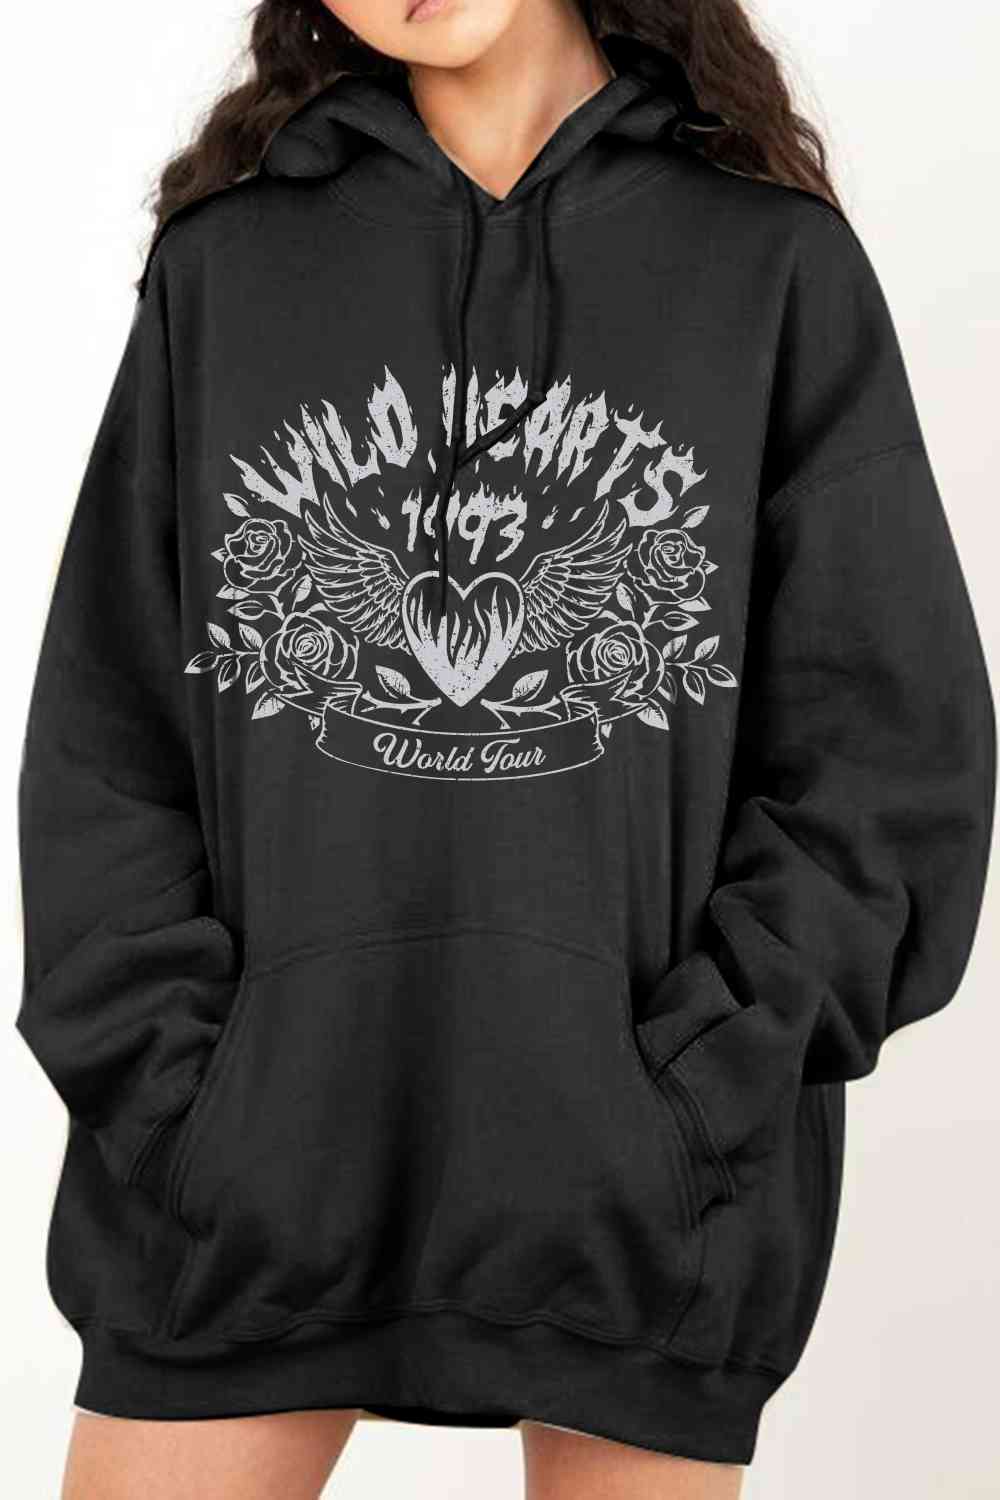 Simply Love Simply Love Full Size WILD HEARTS 1993 WORLD TOUR Graphic Hoodie